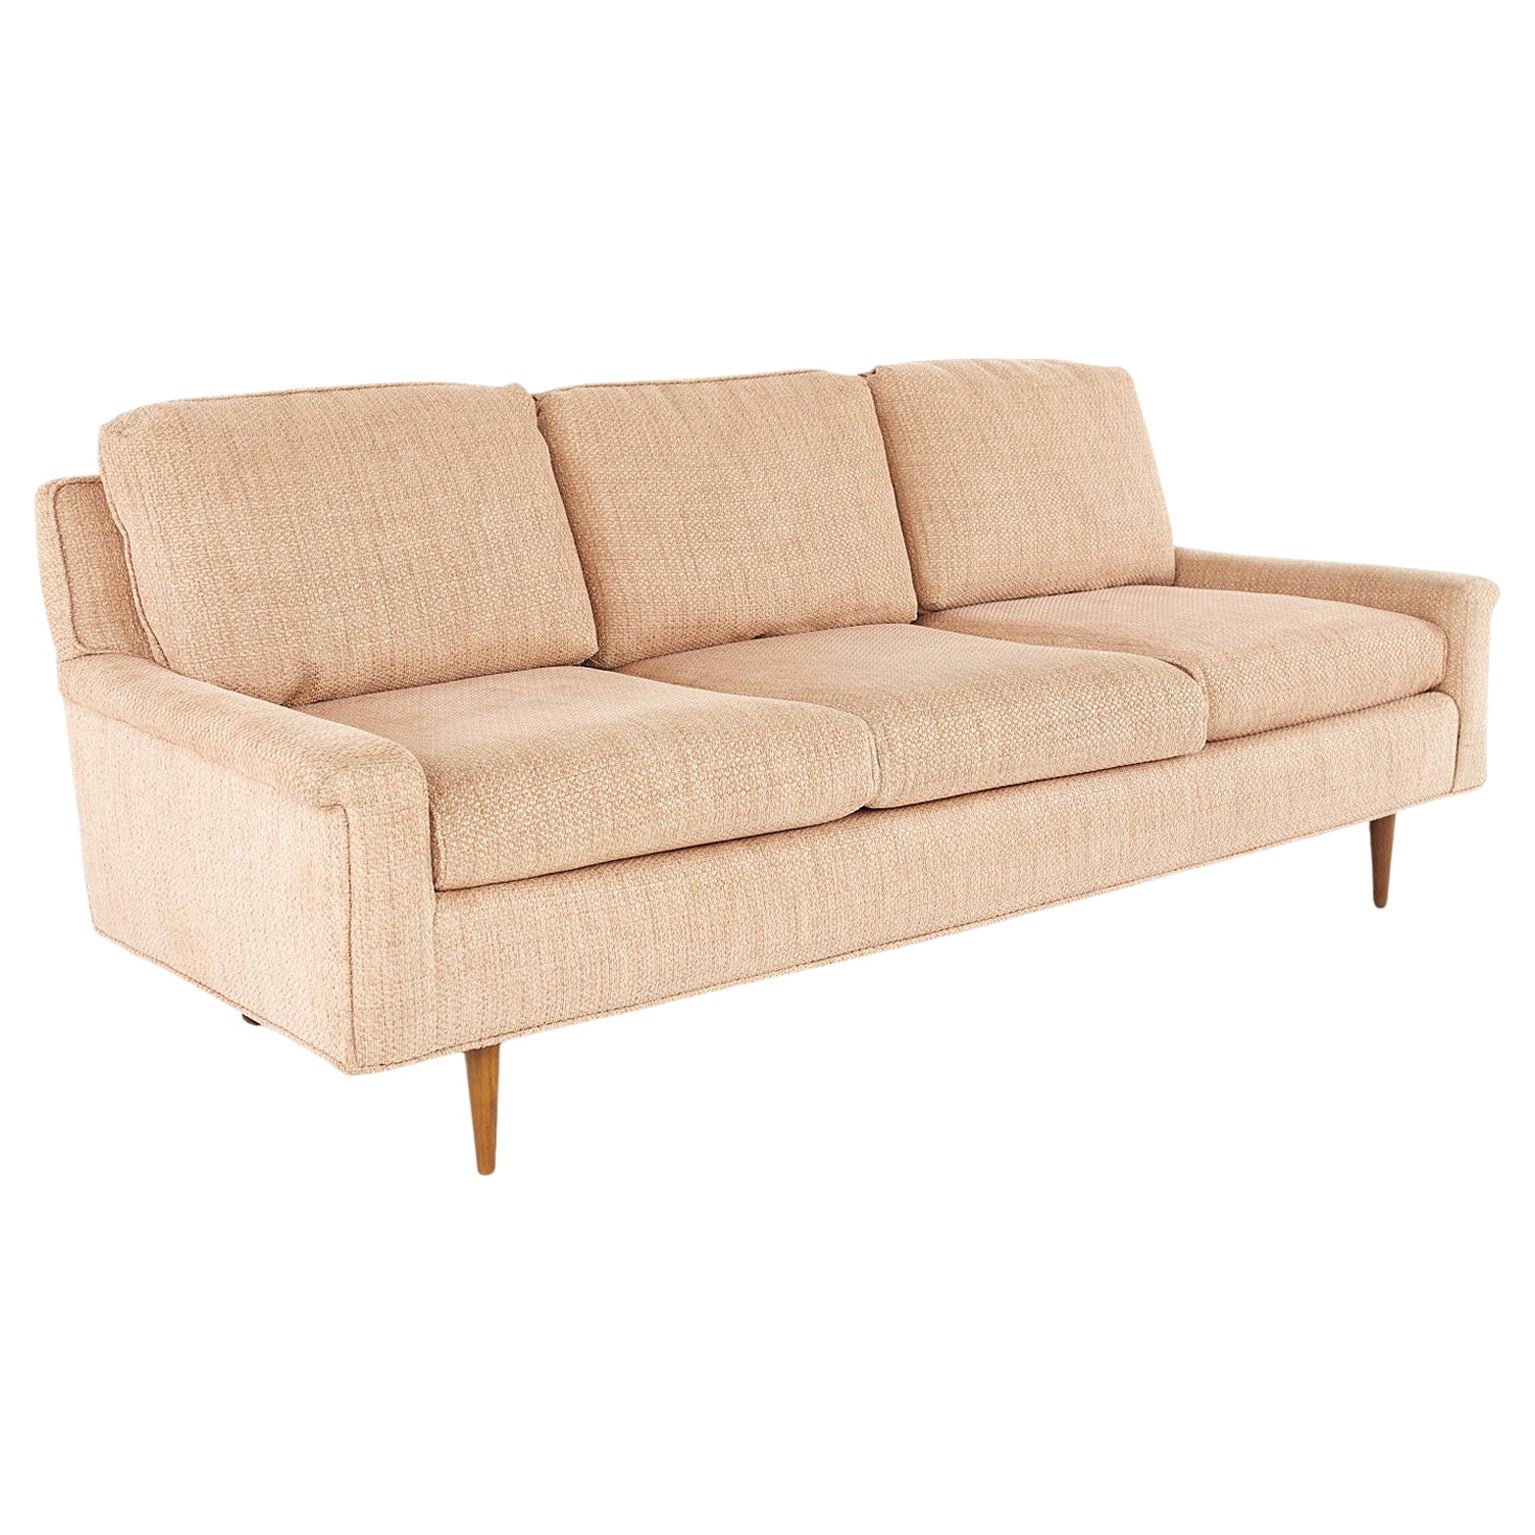 Milo Baughman for Thayer Coggin Style Mid Century Sofa with New Upholstery For Sale